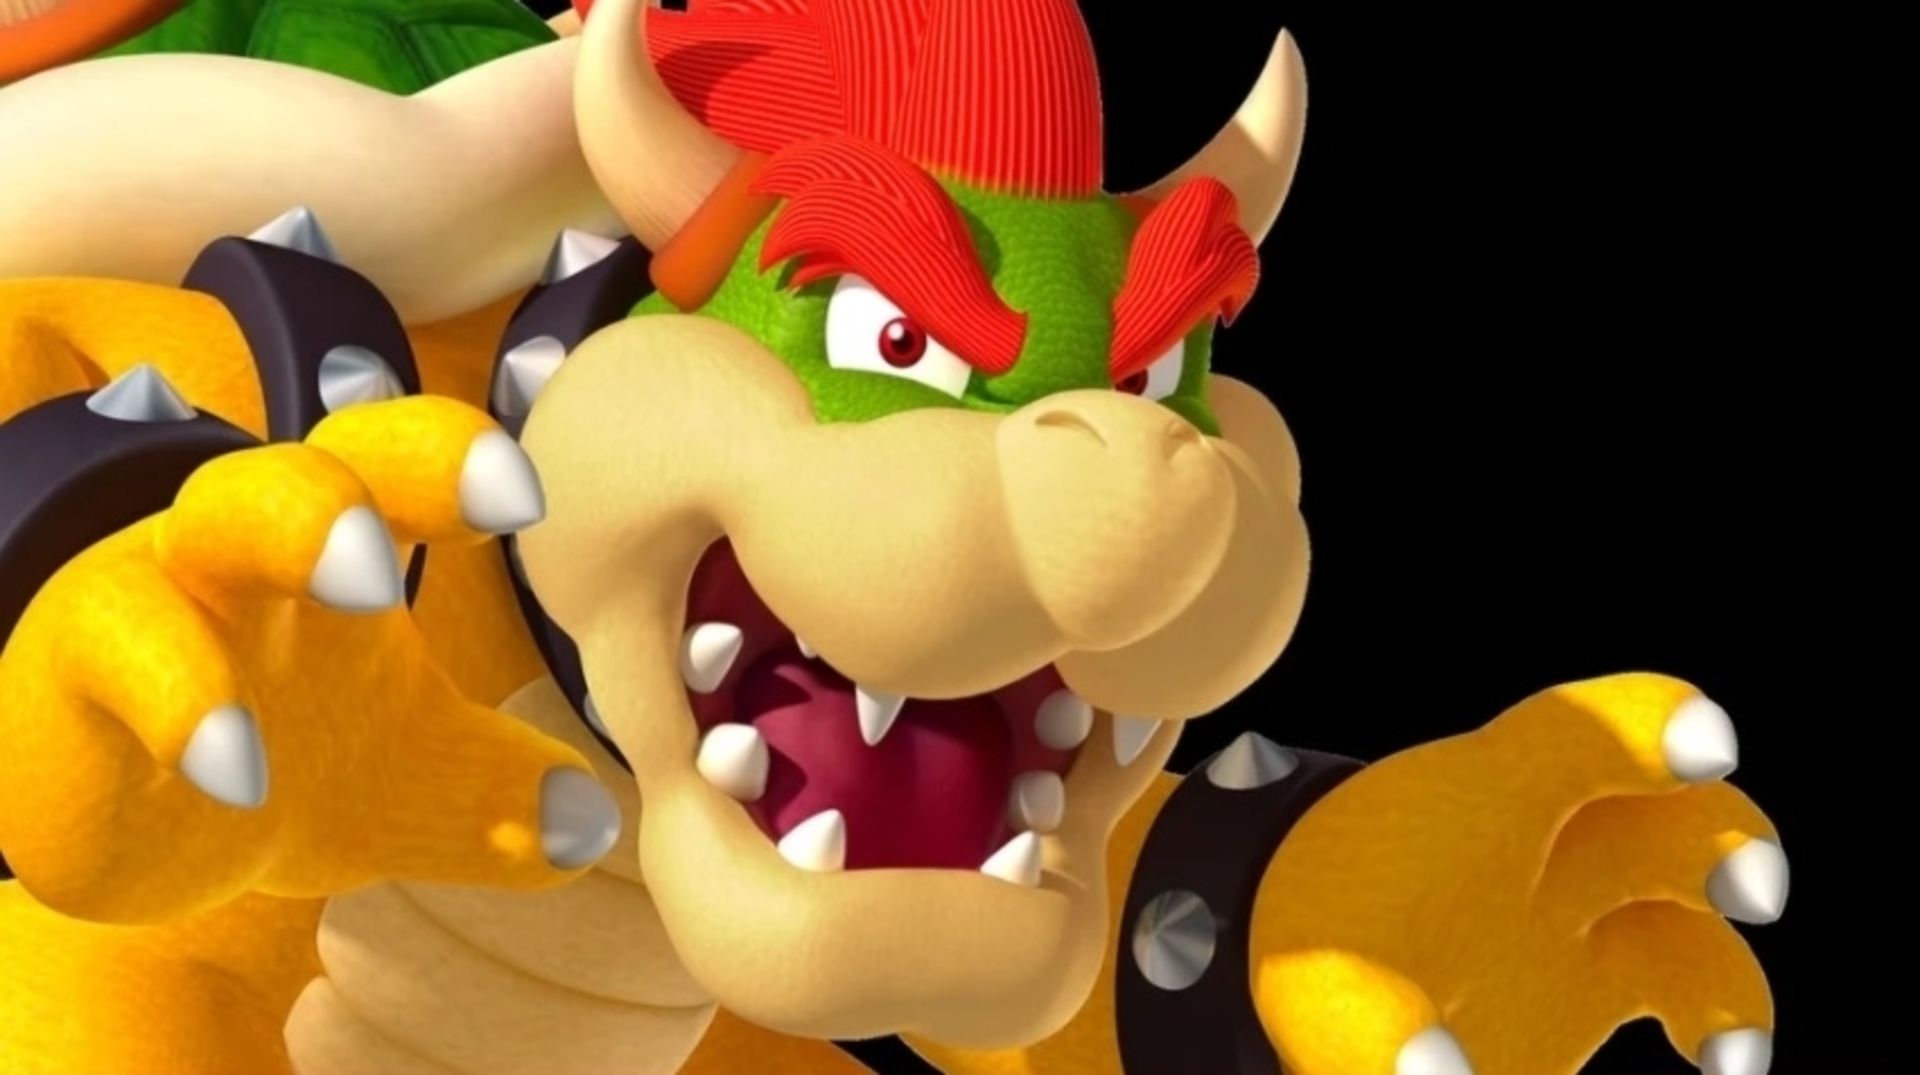 kinky video game characters -  Bowser